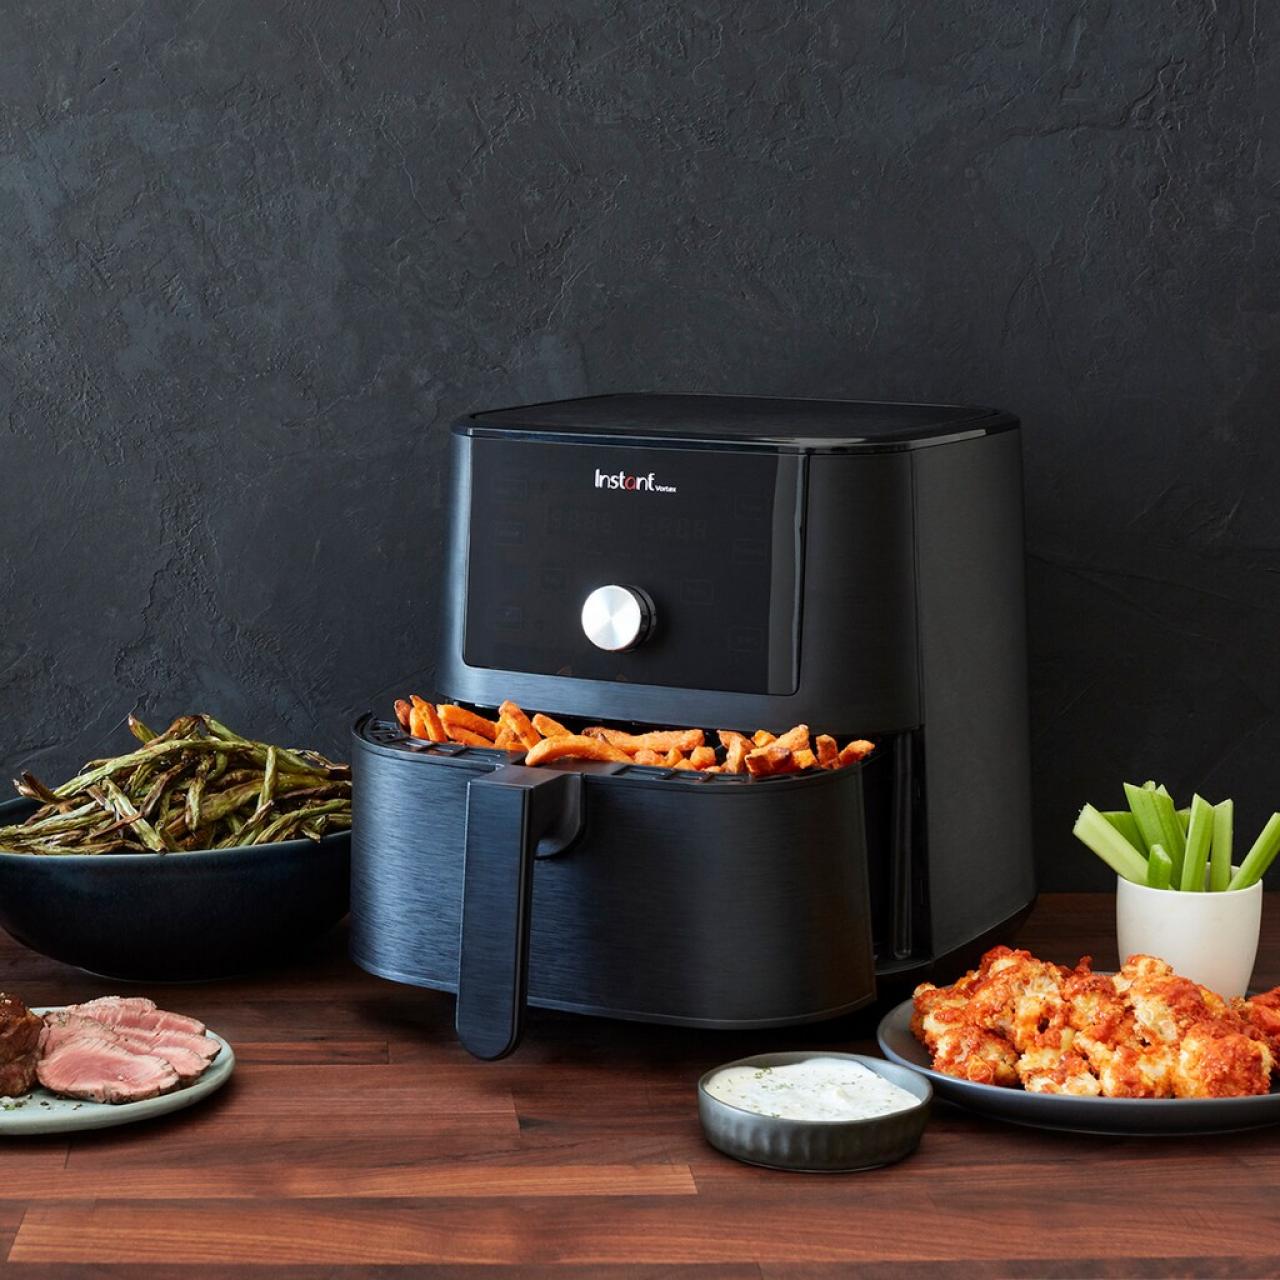 Dash Is Having A Massive Sale On Air Fryers For Prime Day